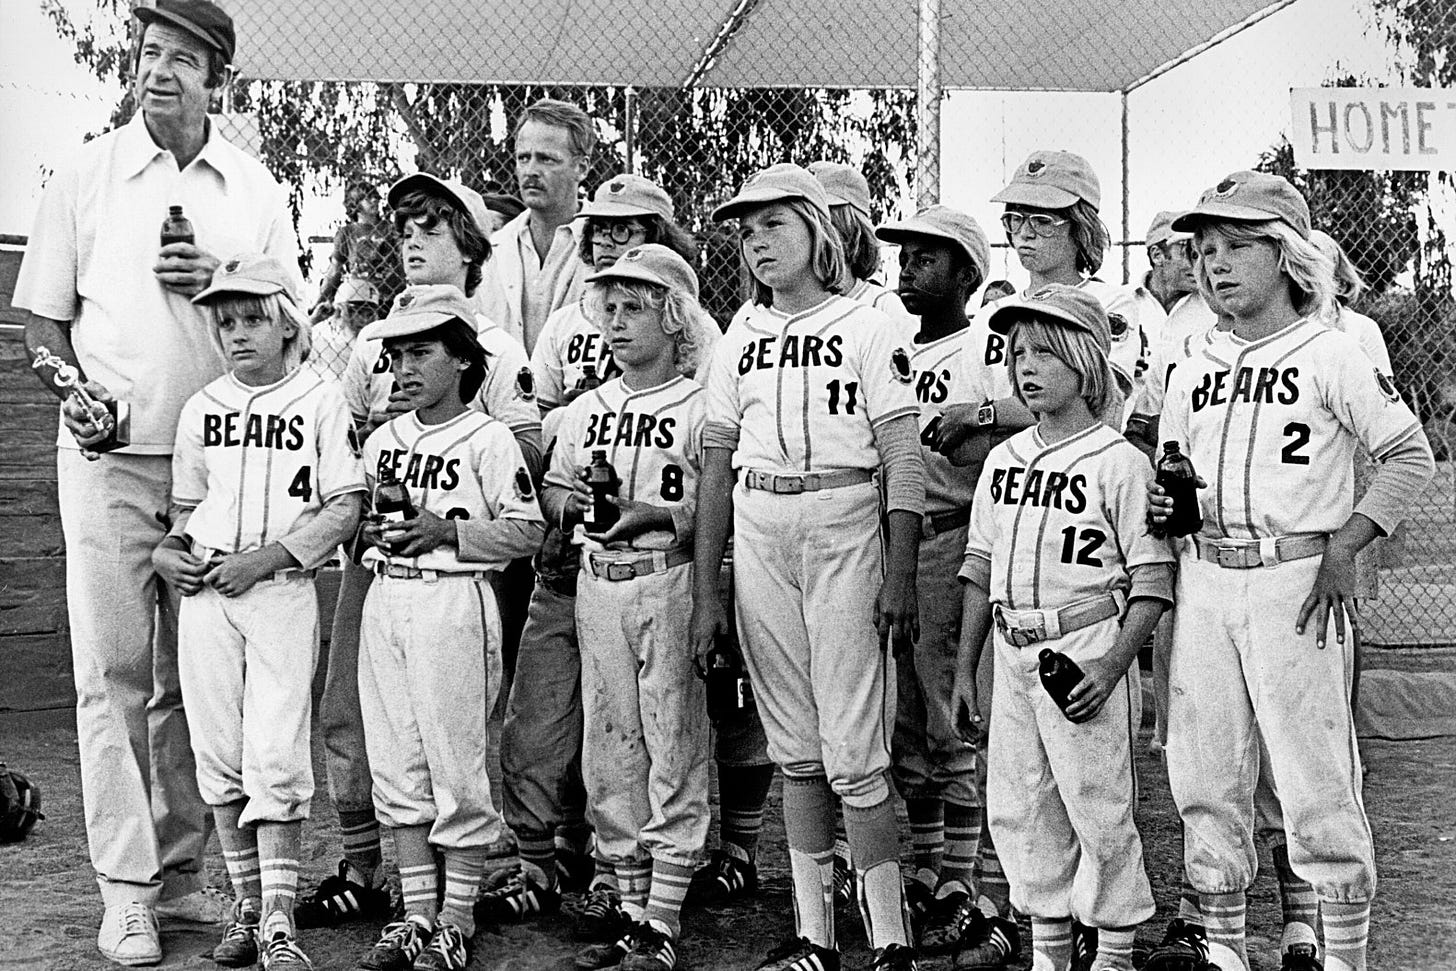 Why 'Bad News Bears' Is the Greatest Baseball Movie Ever Made